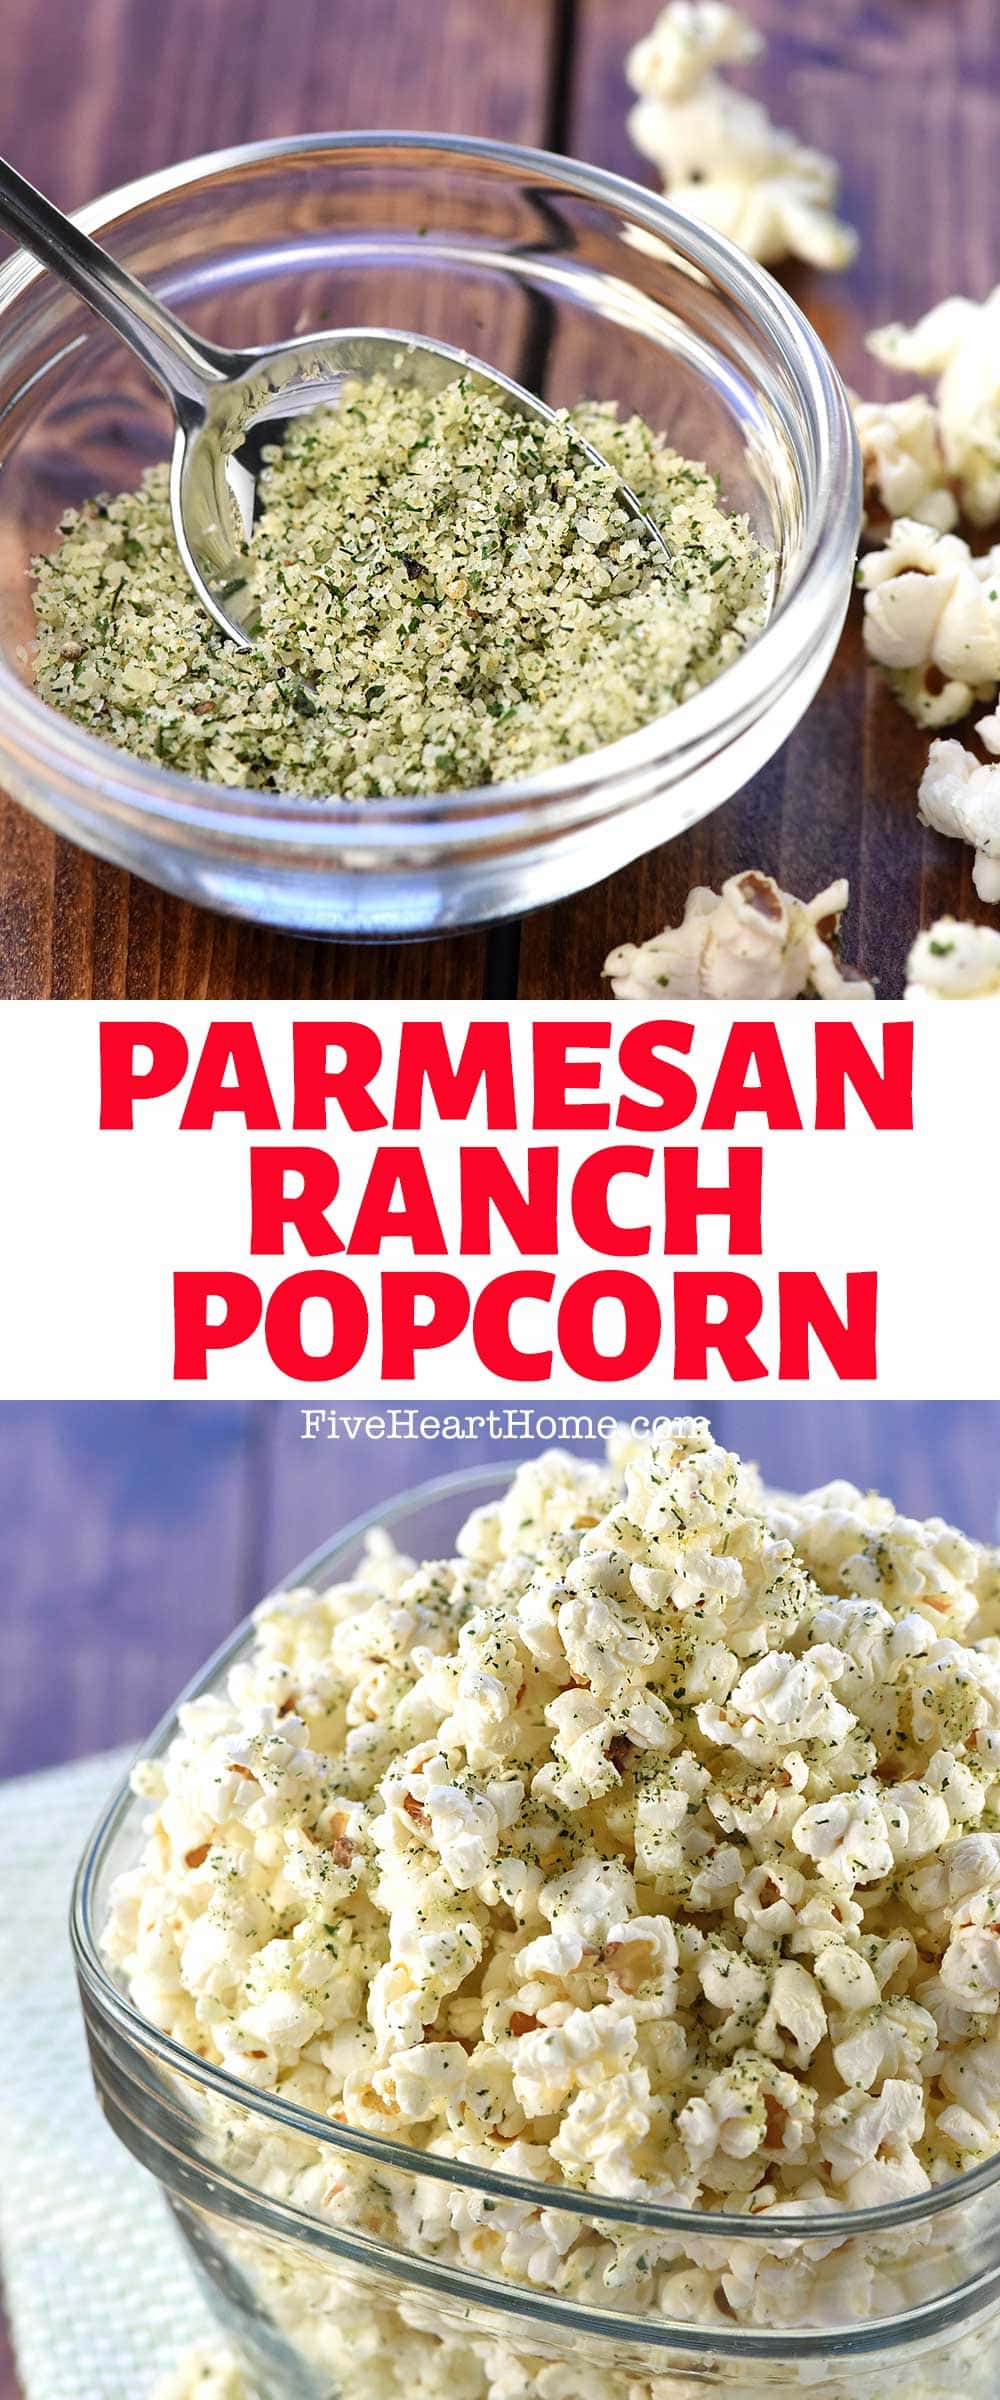 Ranch Popcorn Seasoning ~ a savory mixture of dried herbs, spices, and Parmesan that makes a delicious snack or perfect movie night treat when sprinkled over freshly popped popcorn drizzled in real butter!  | FiveHeartHome.com via @fivehearthome